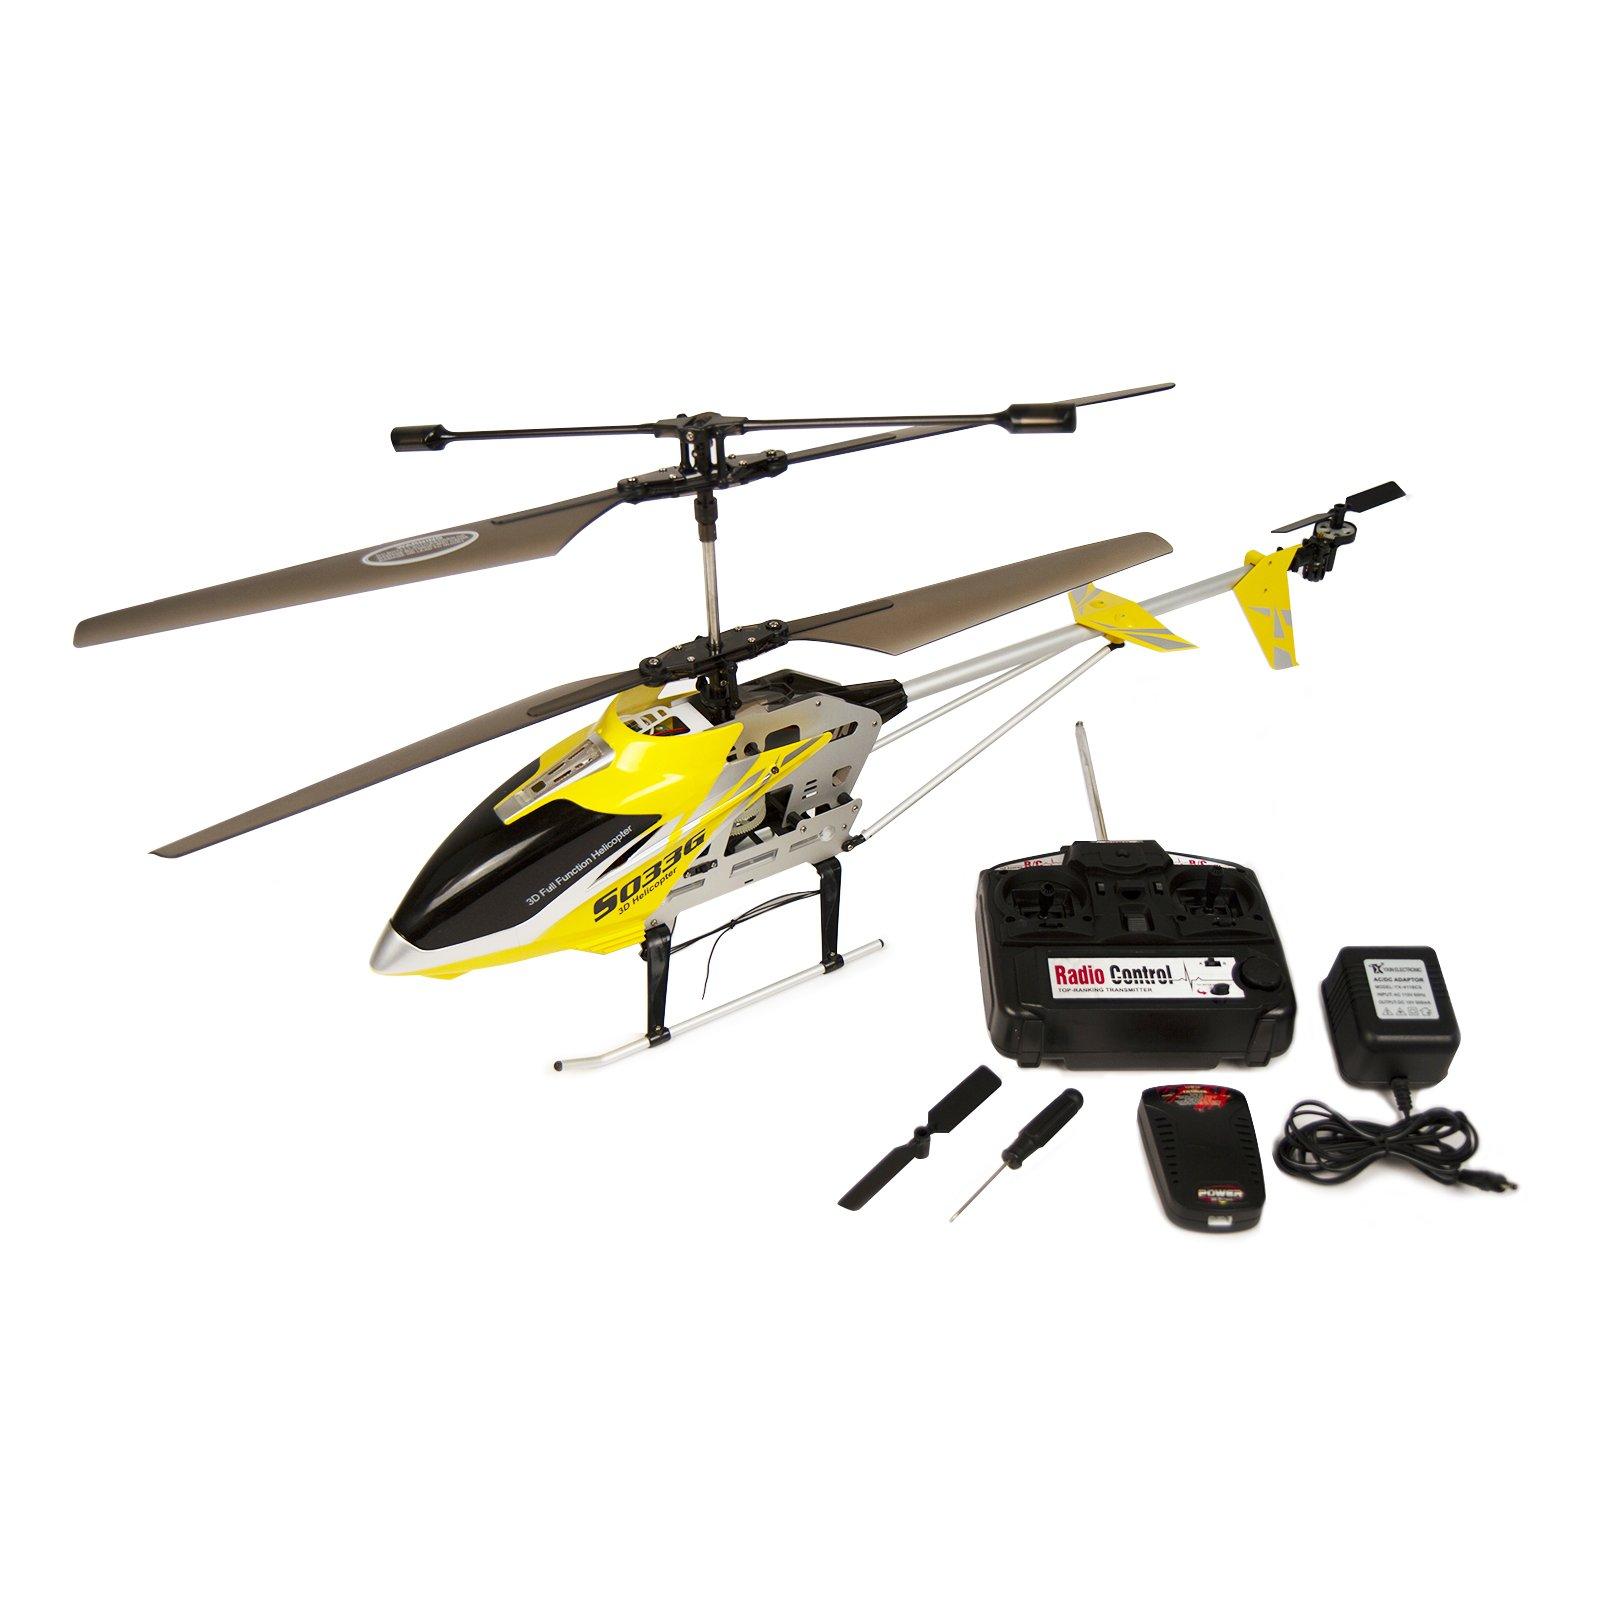 Syma S033G Helicopter: LED Lights for Night Flights